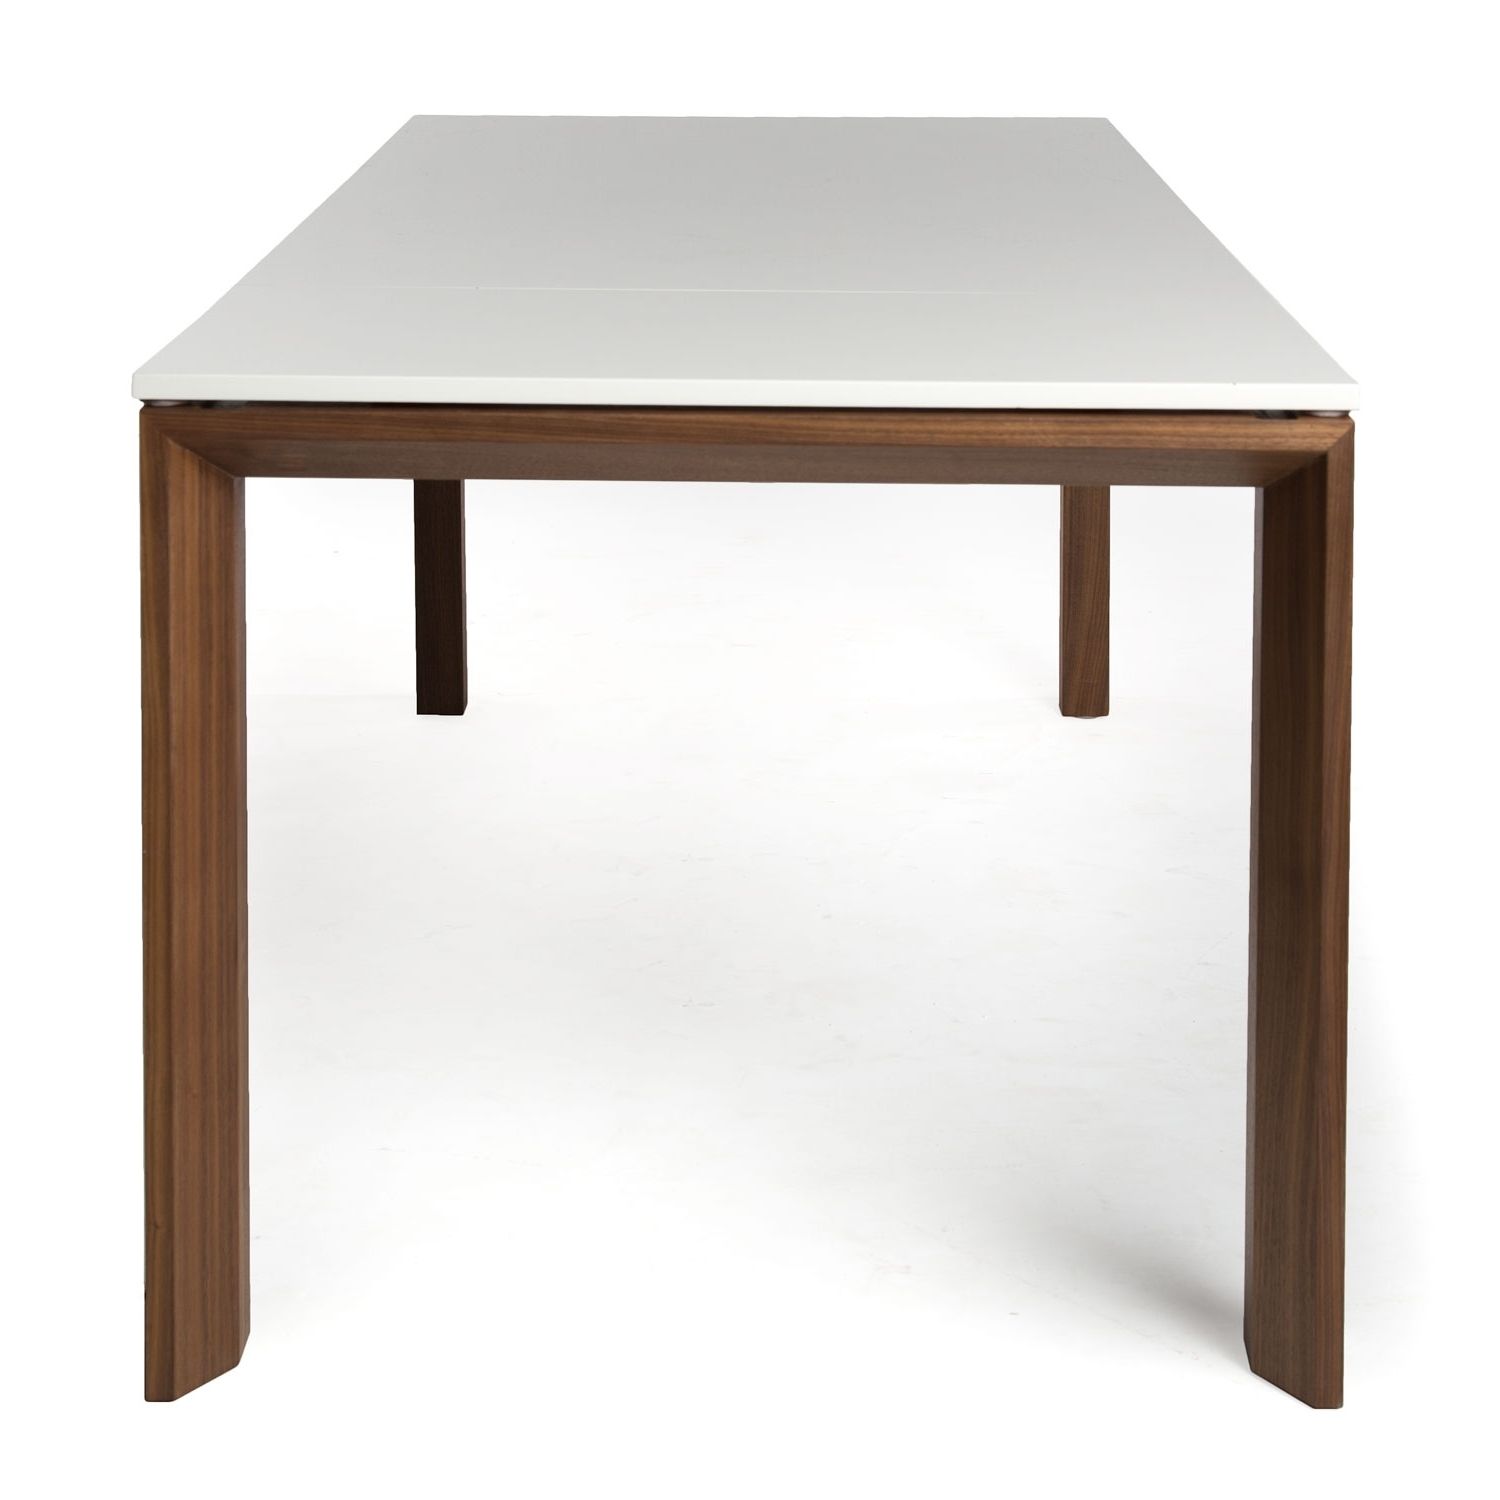 Most Popular Dining Tables With White Legs Within White Modern Dining Tables With Walnut Legs (View 10 of 25)